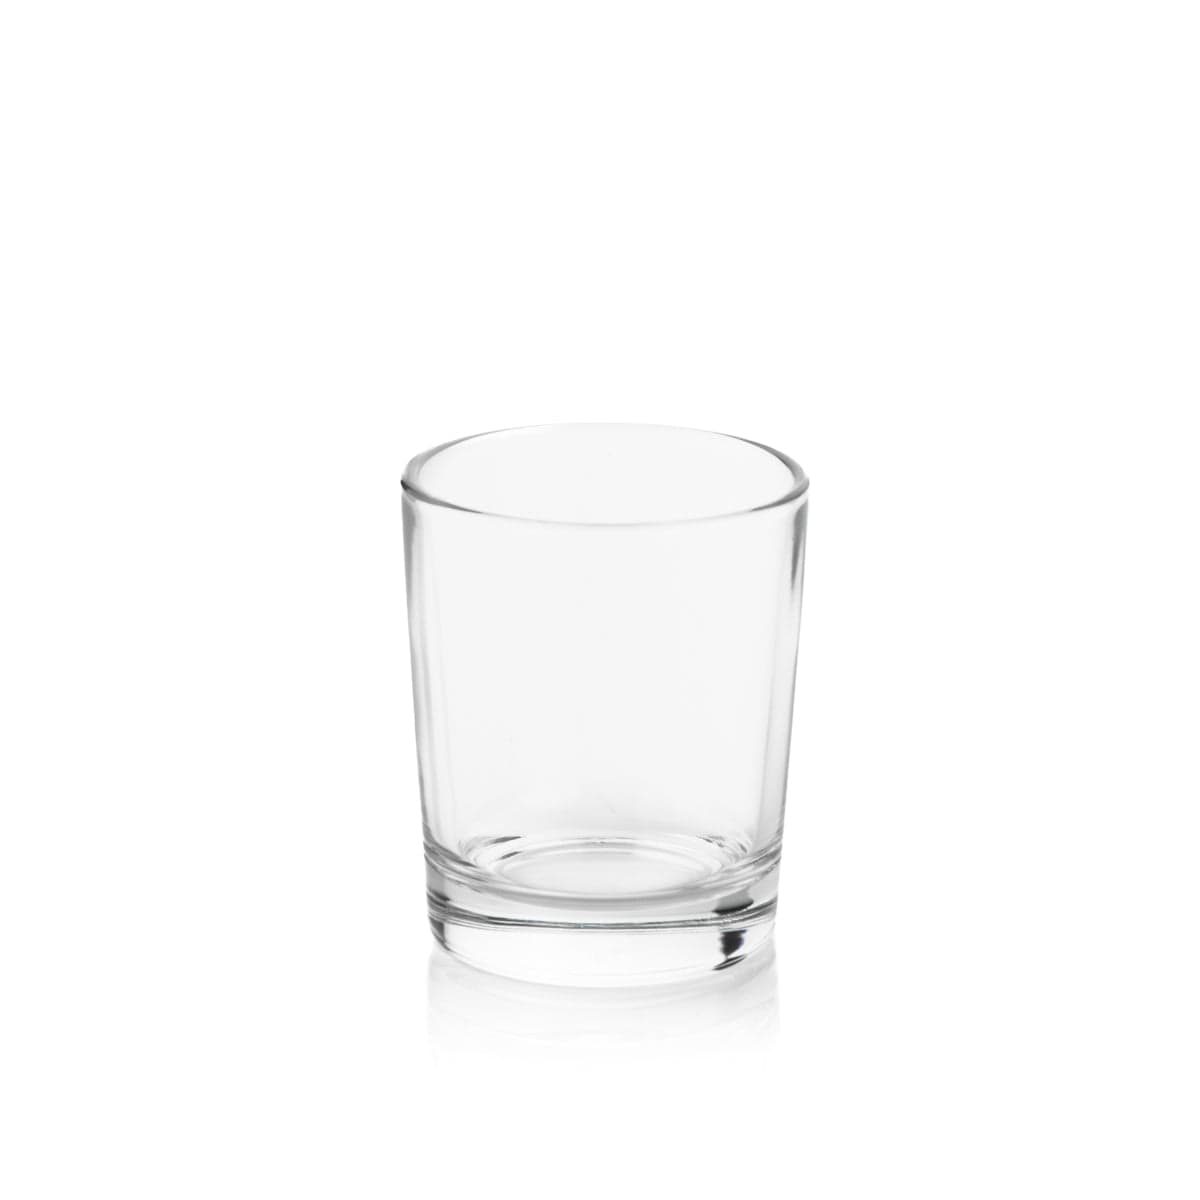 Candle Shack Candle Jar 9cl Votive Candle Glass - Clear (box of 10)